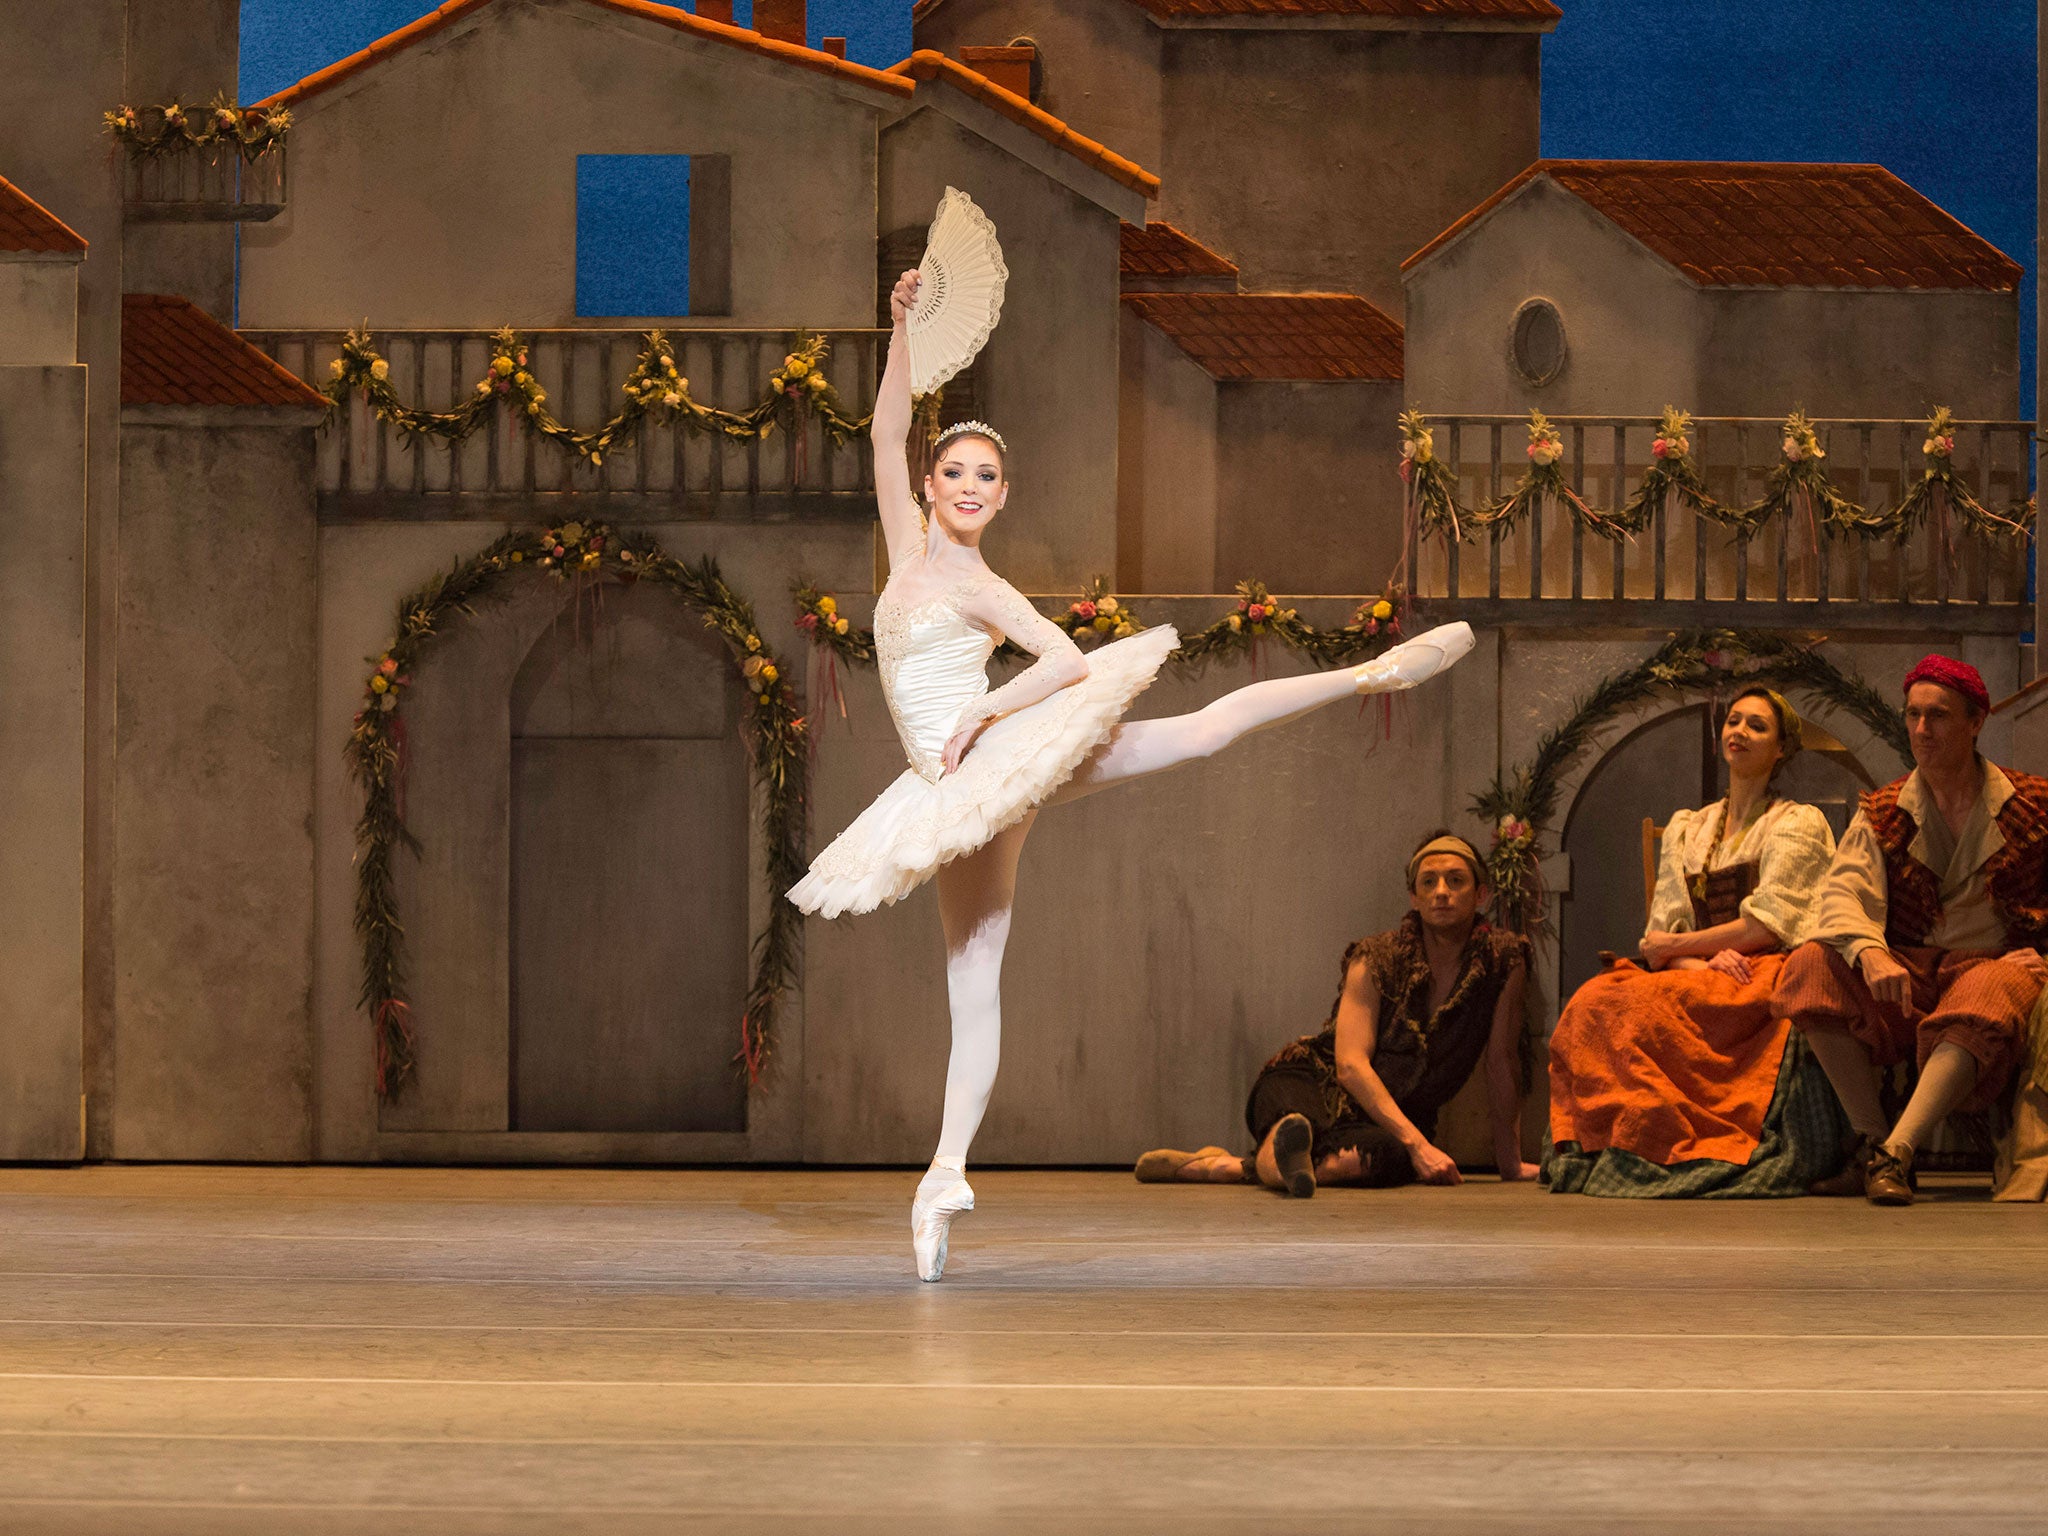 Out of step: The Royal Ballet is a national company, and should be seen nationwide